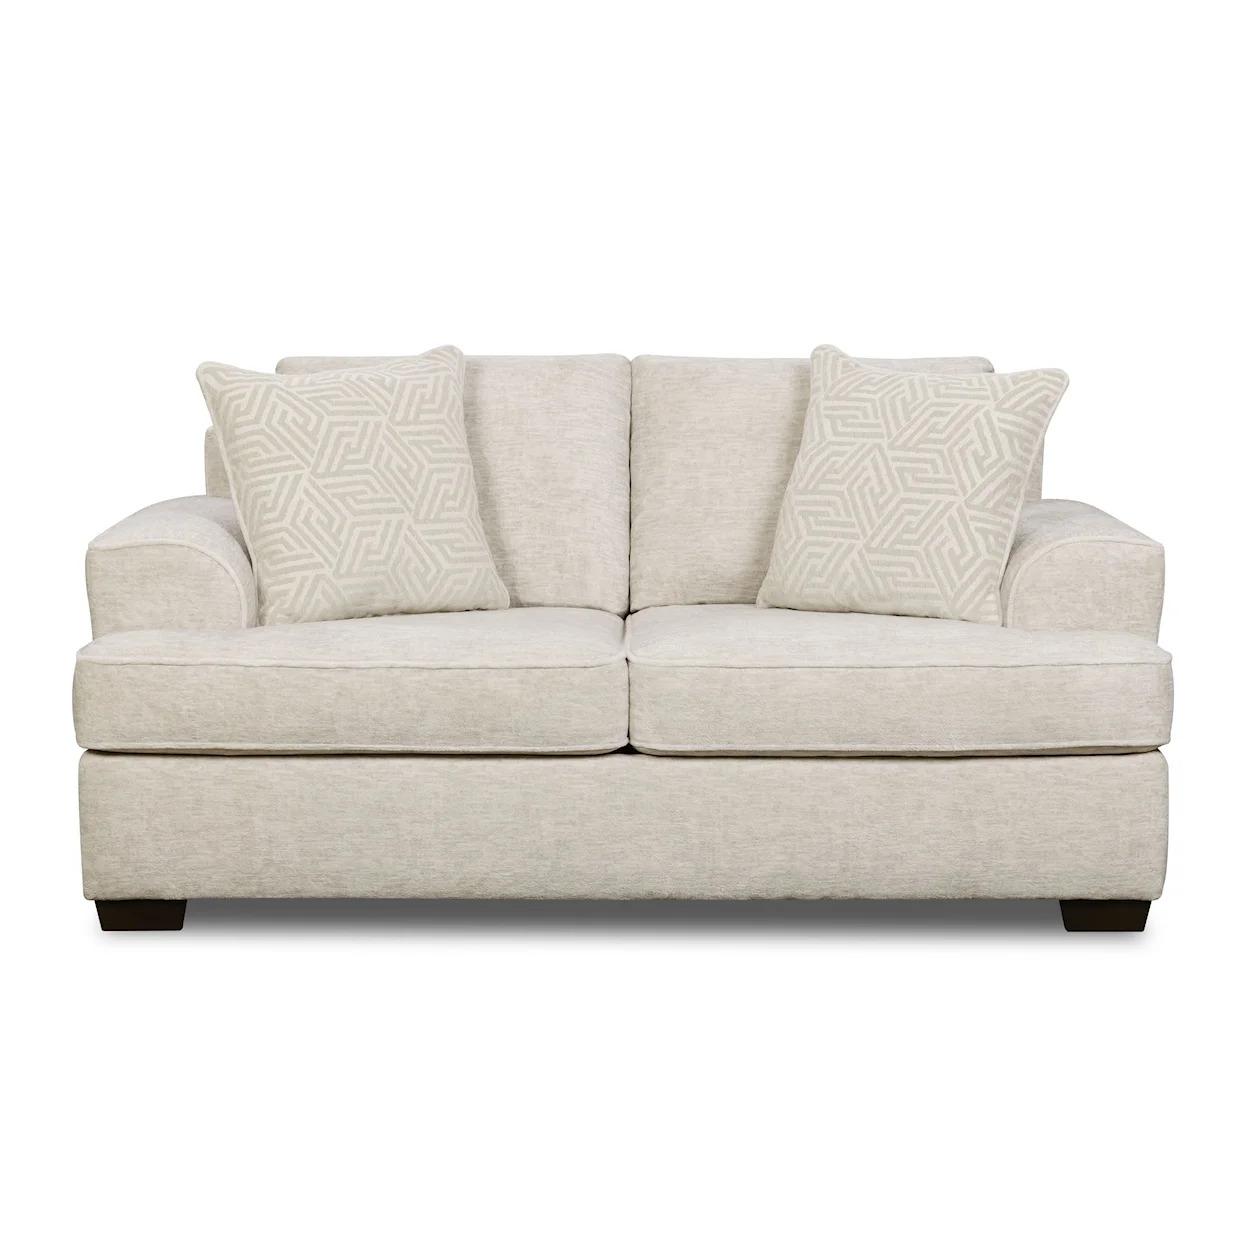 cREAM lOVE sEAT WITH 2 ACCENT PILLOWS